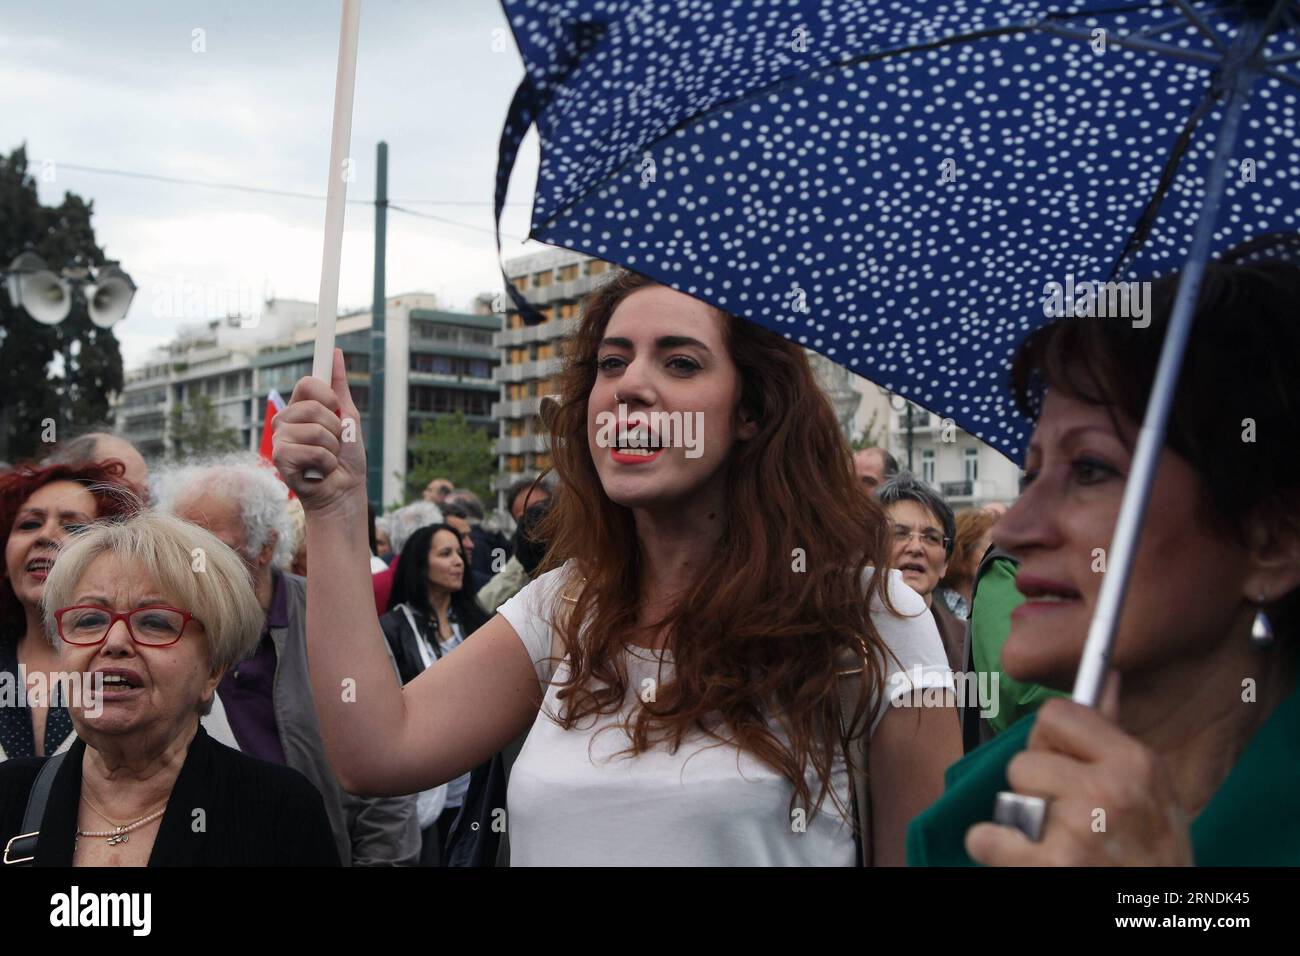 (160523) -- ATHENS, May 22, 2016 -- Demonstrators shout slogans during a protest in Athens, Greece, May 22, 2016. Approximately 11,000 demonstrators, according to police estimates, participated in the rallies staged by labor unions to protest against an omnibus bill. The critical multi-bill containing the last set of prior actions demanded by Greece s creditors to complete the first review of the Greek third program, unlock the next bailout tranche and open the way to debt relief talks was approved by the majority of Greek legislators on Sunday. ) GREECE-ATHENS-POLITICS-PROTEST MariosxLolos PU Stock Photo